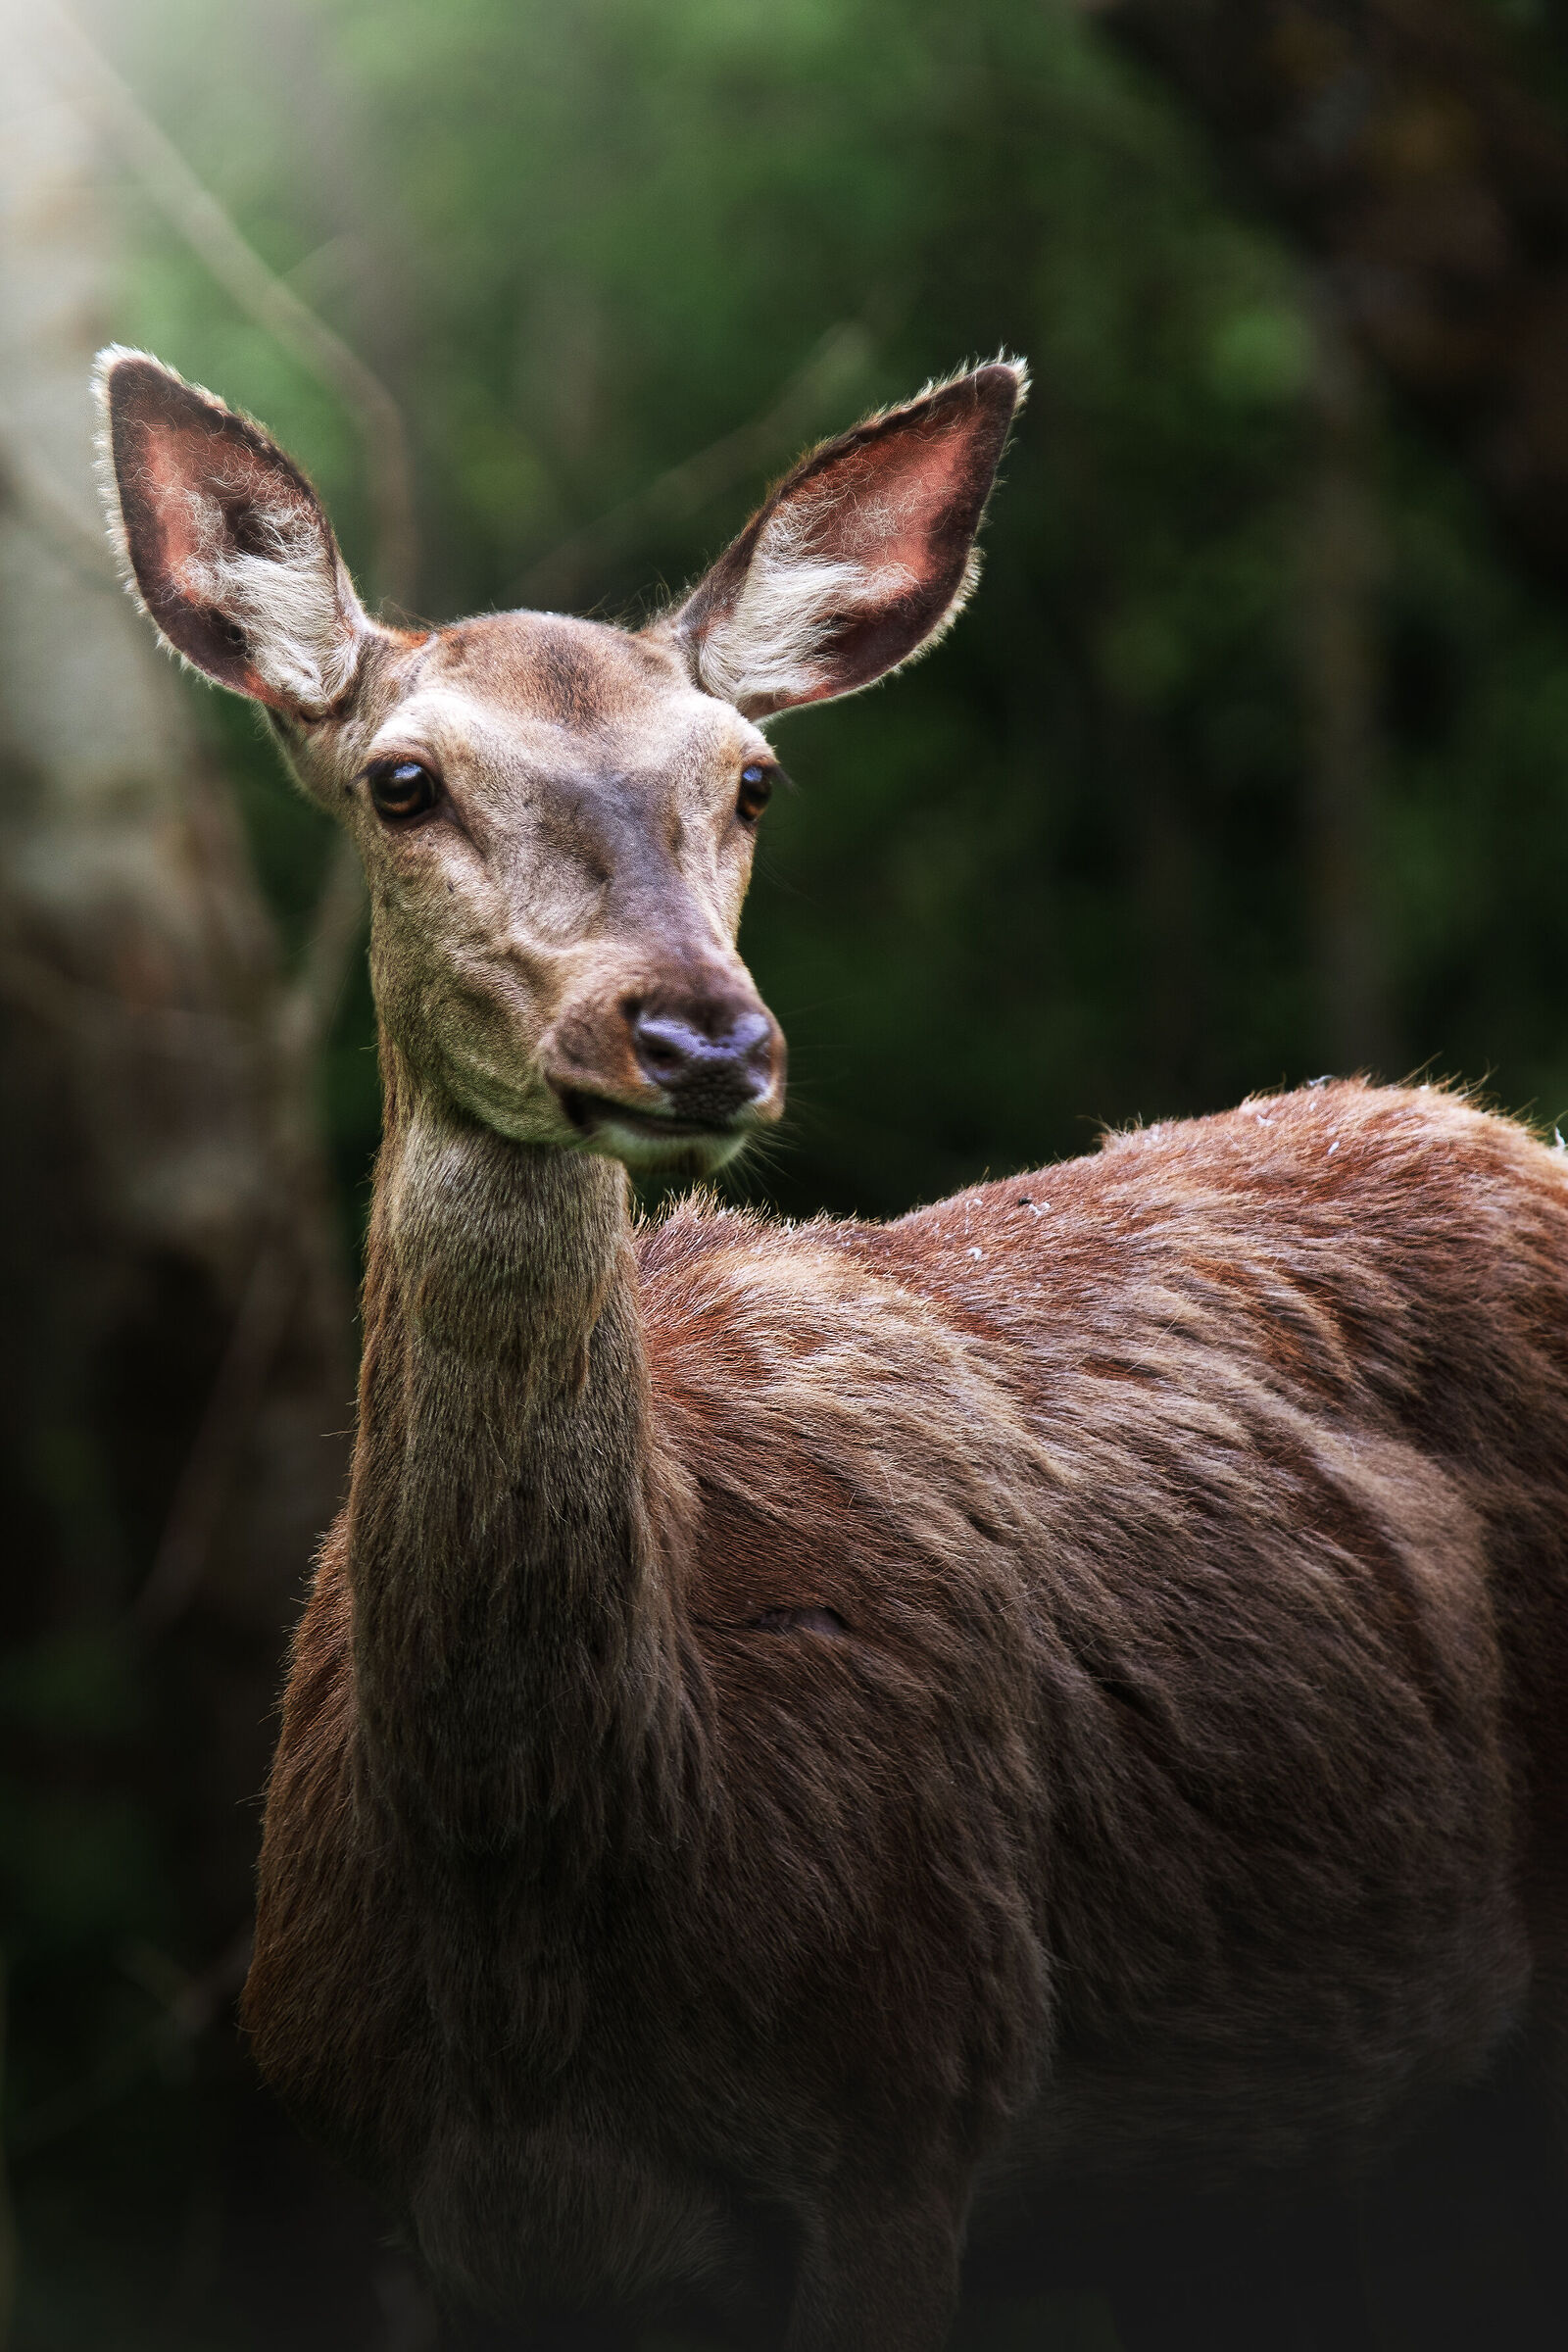 From Abruzzo - Deer...